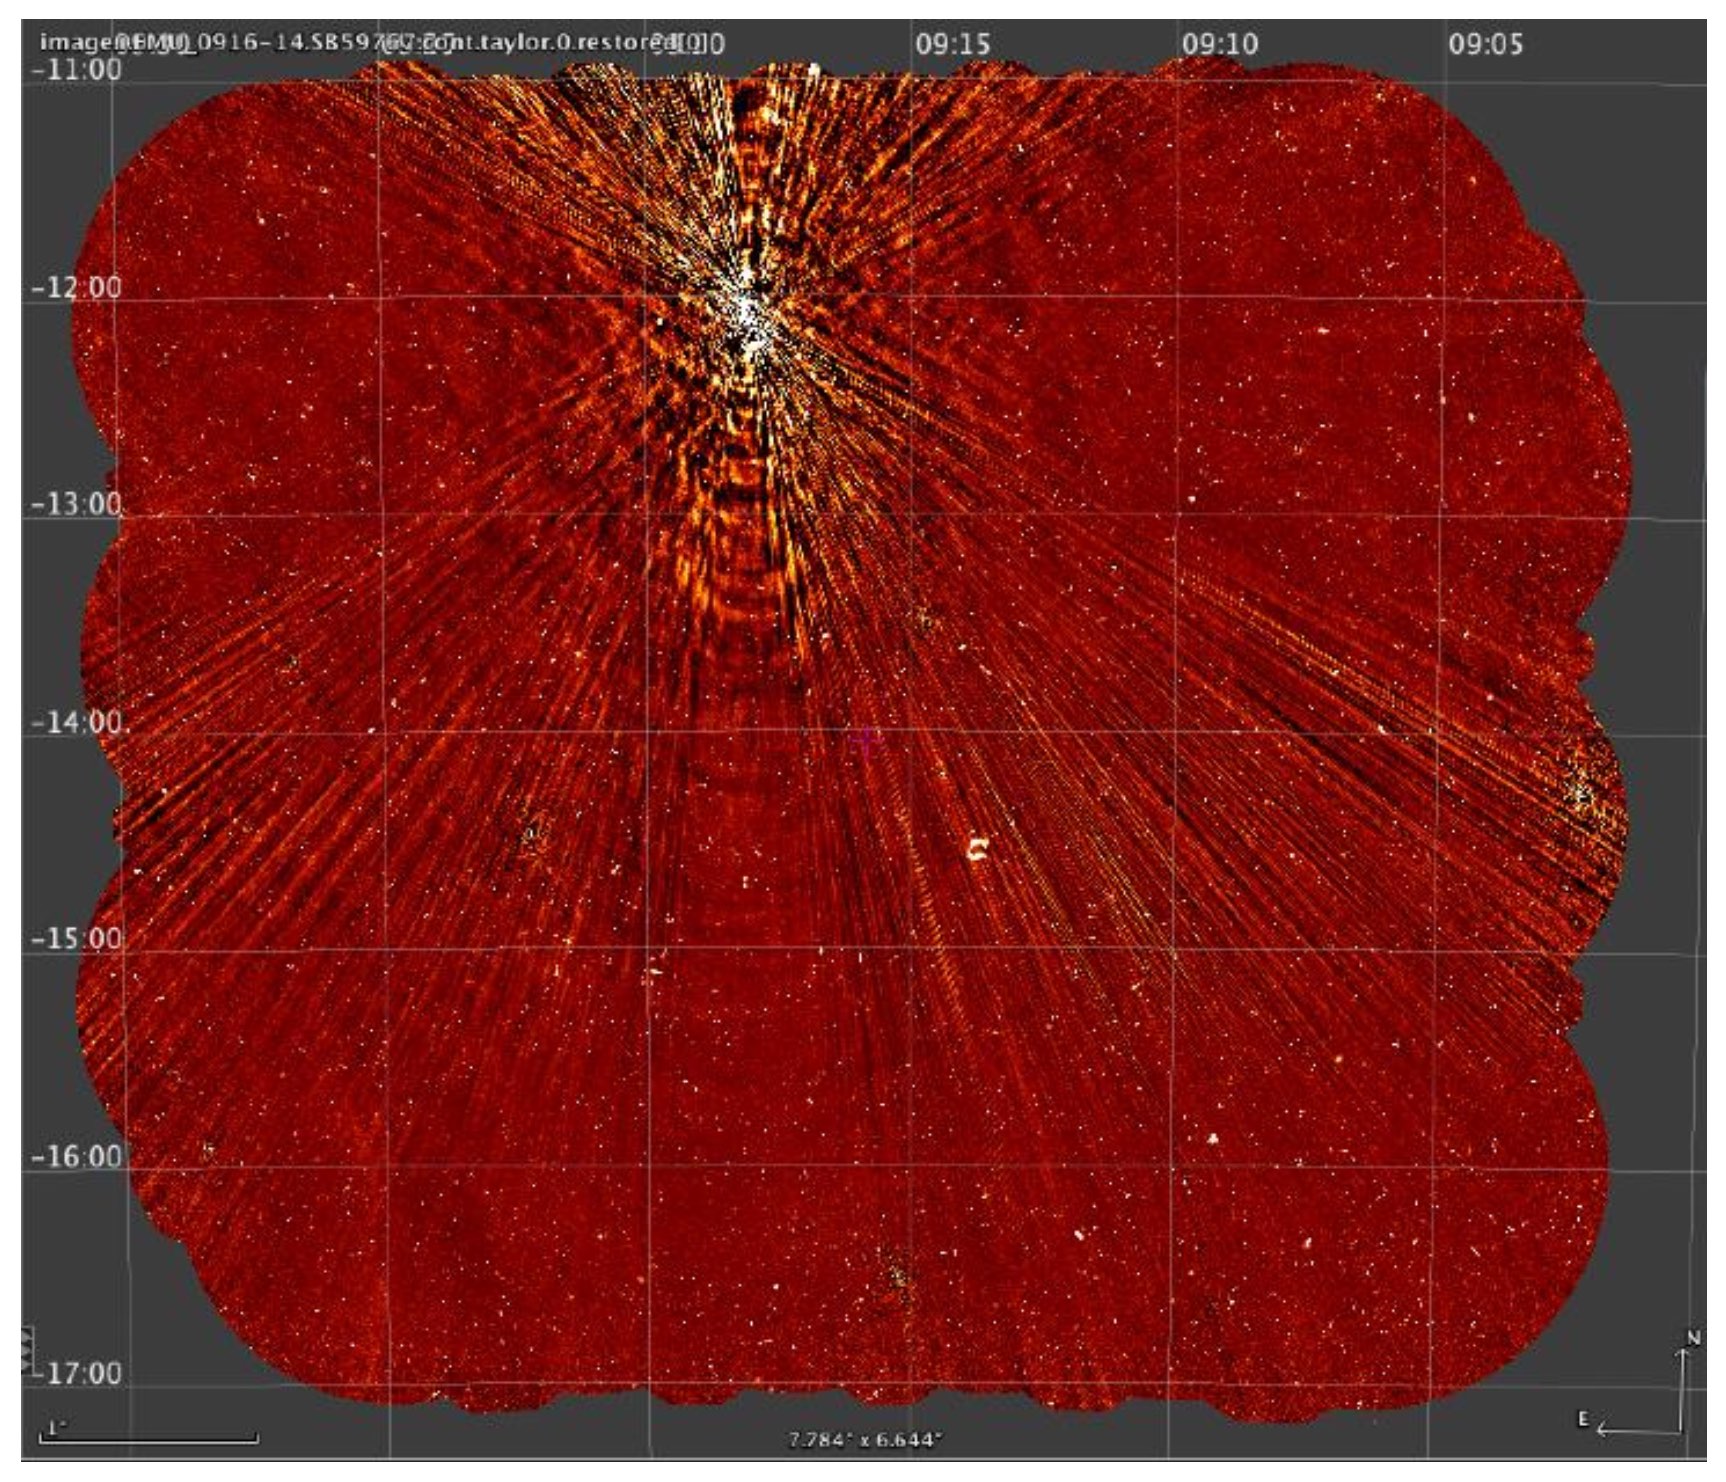 An ASKAP image from the standard pipeline processing of a field containing the galaxy Hydra A, showing significant imaging artefacts around the bright radio source.